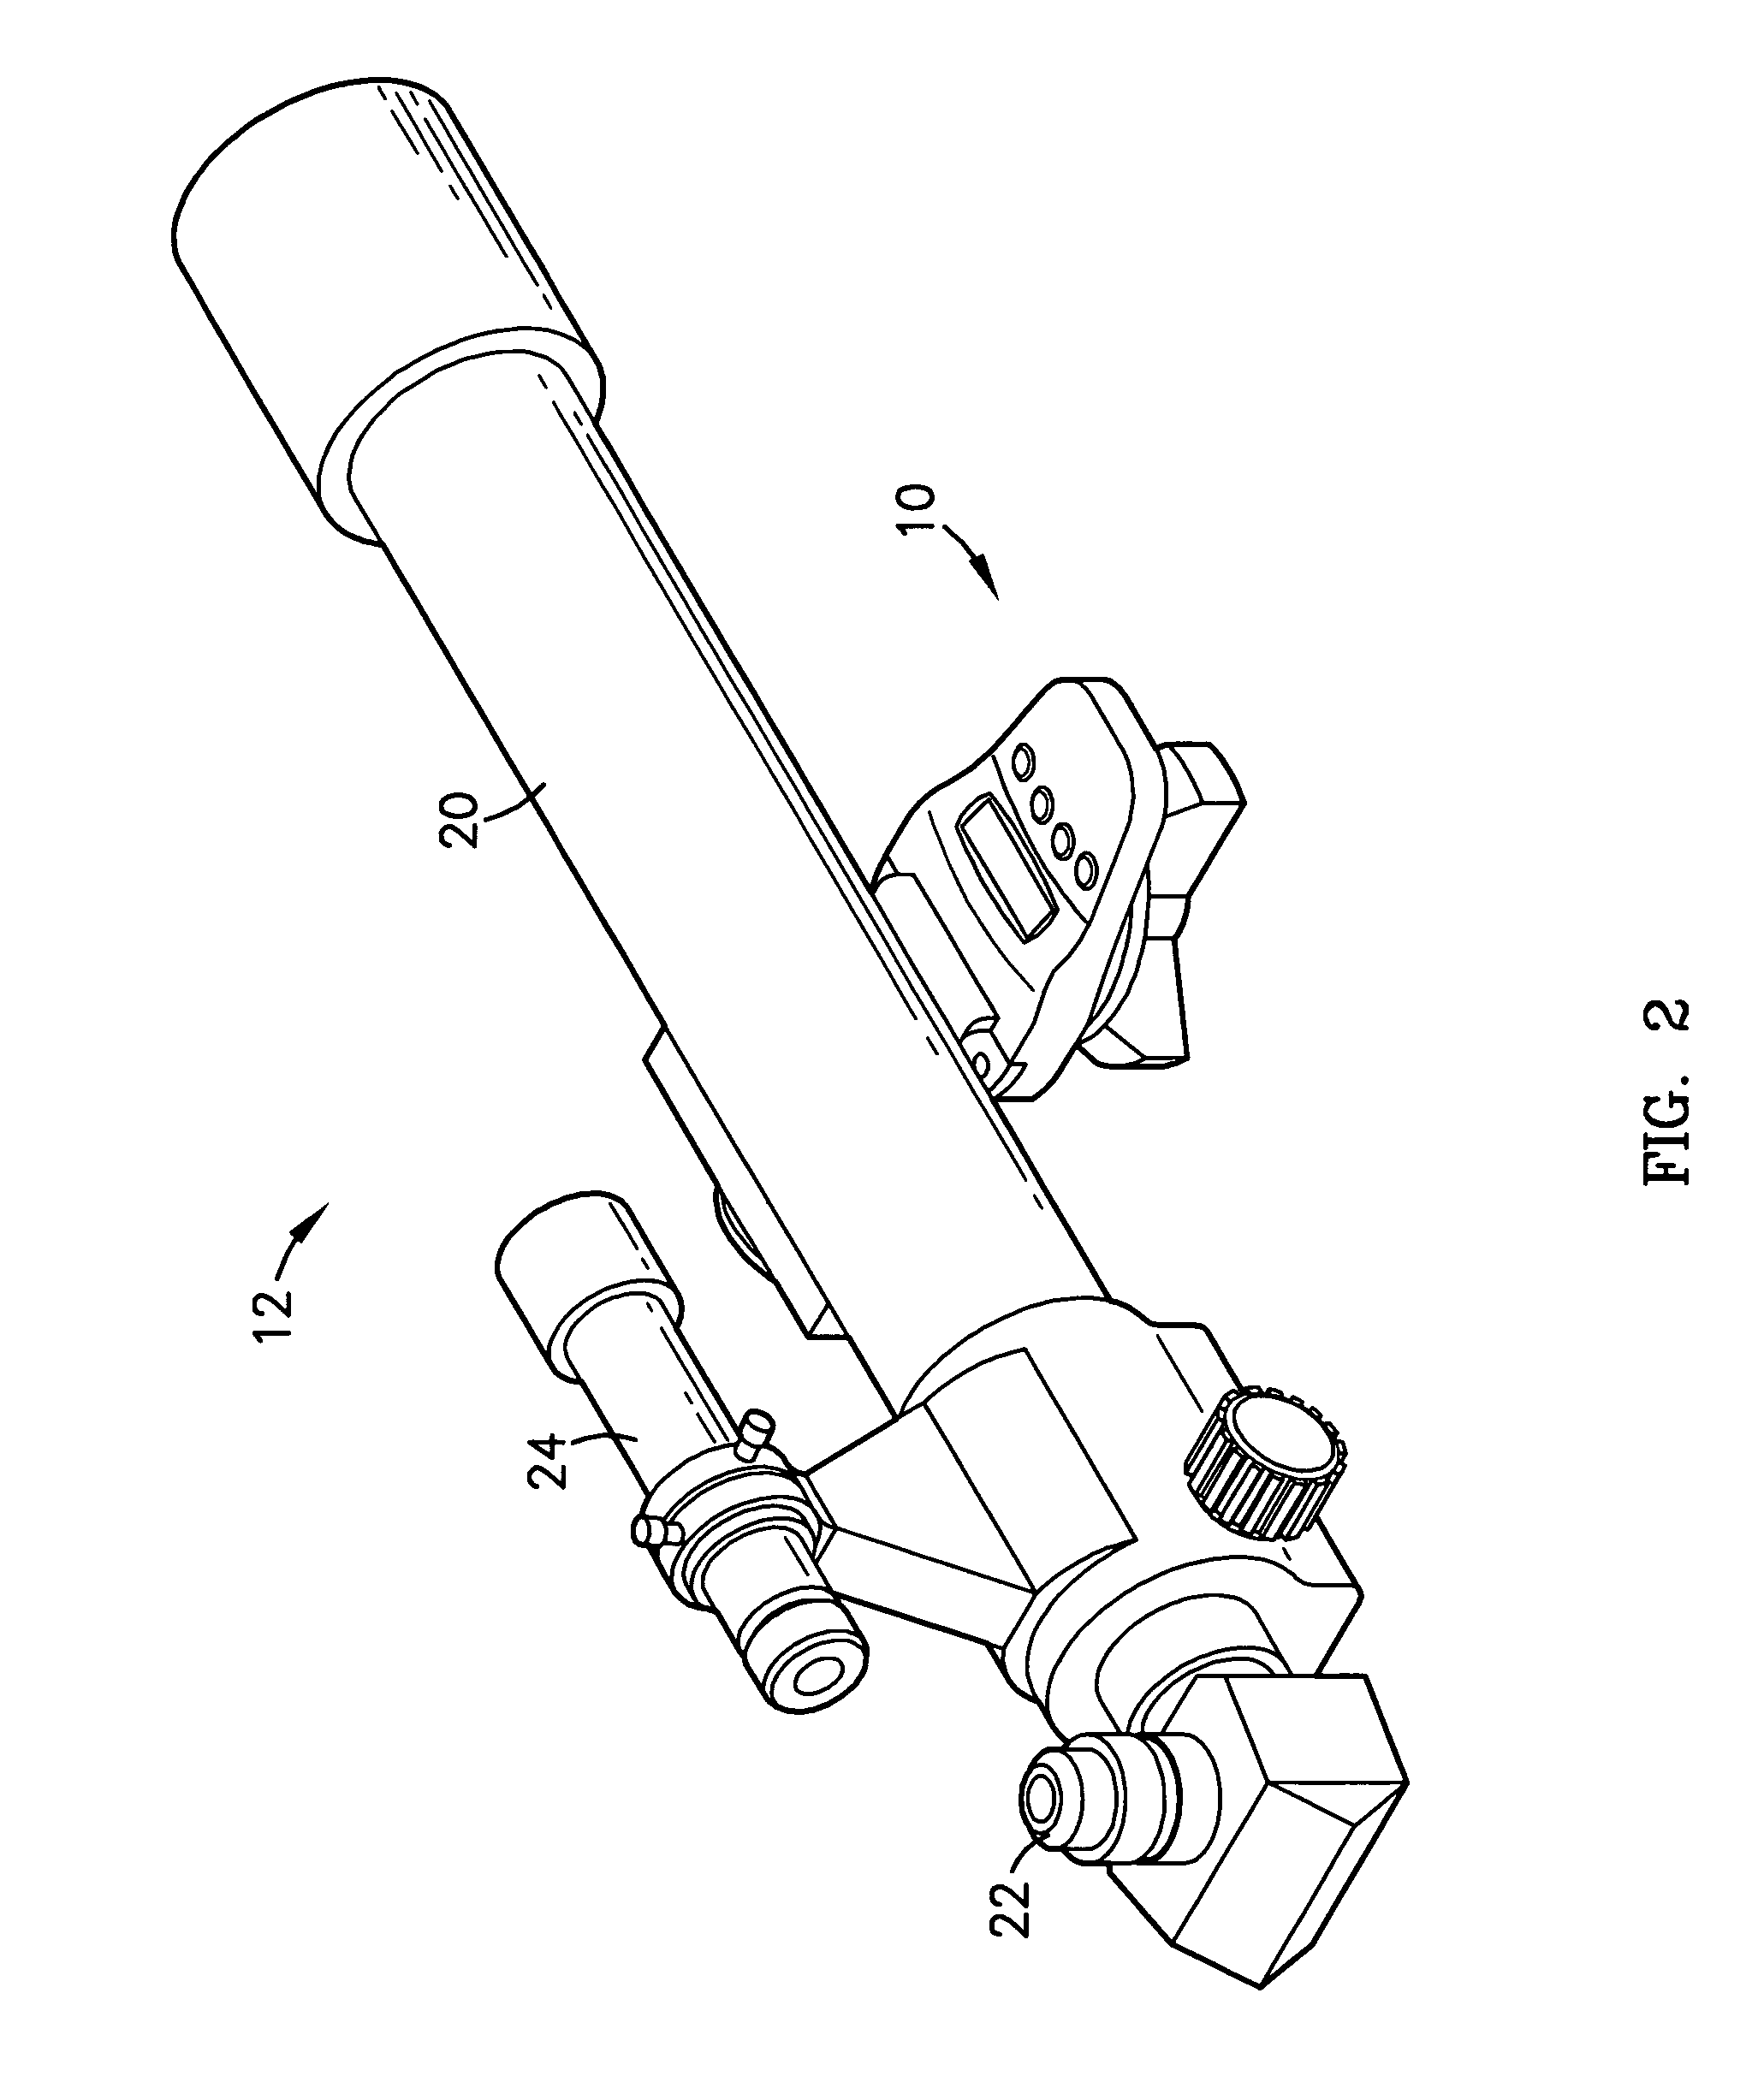 Telescope mount having locator system and drive mechanism for locating objects and positioning telescope